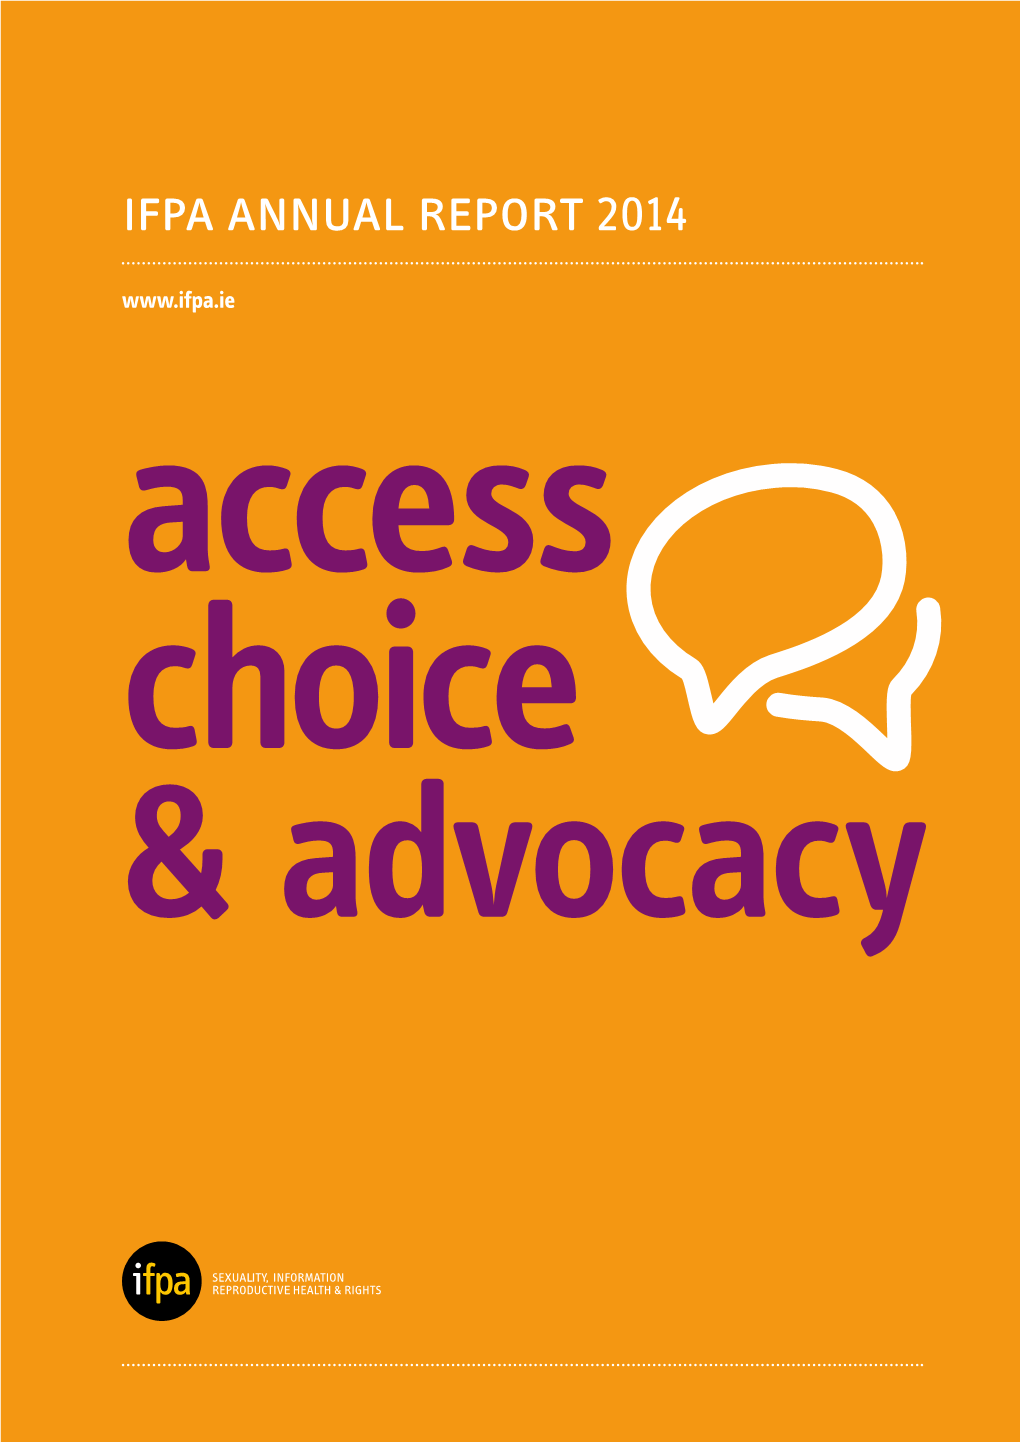 Ifpa Annual Report 2014 Access Choice & Advocacy